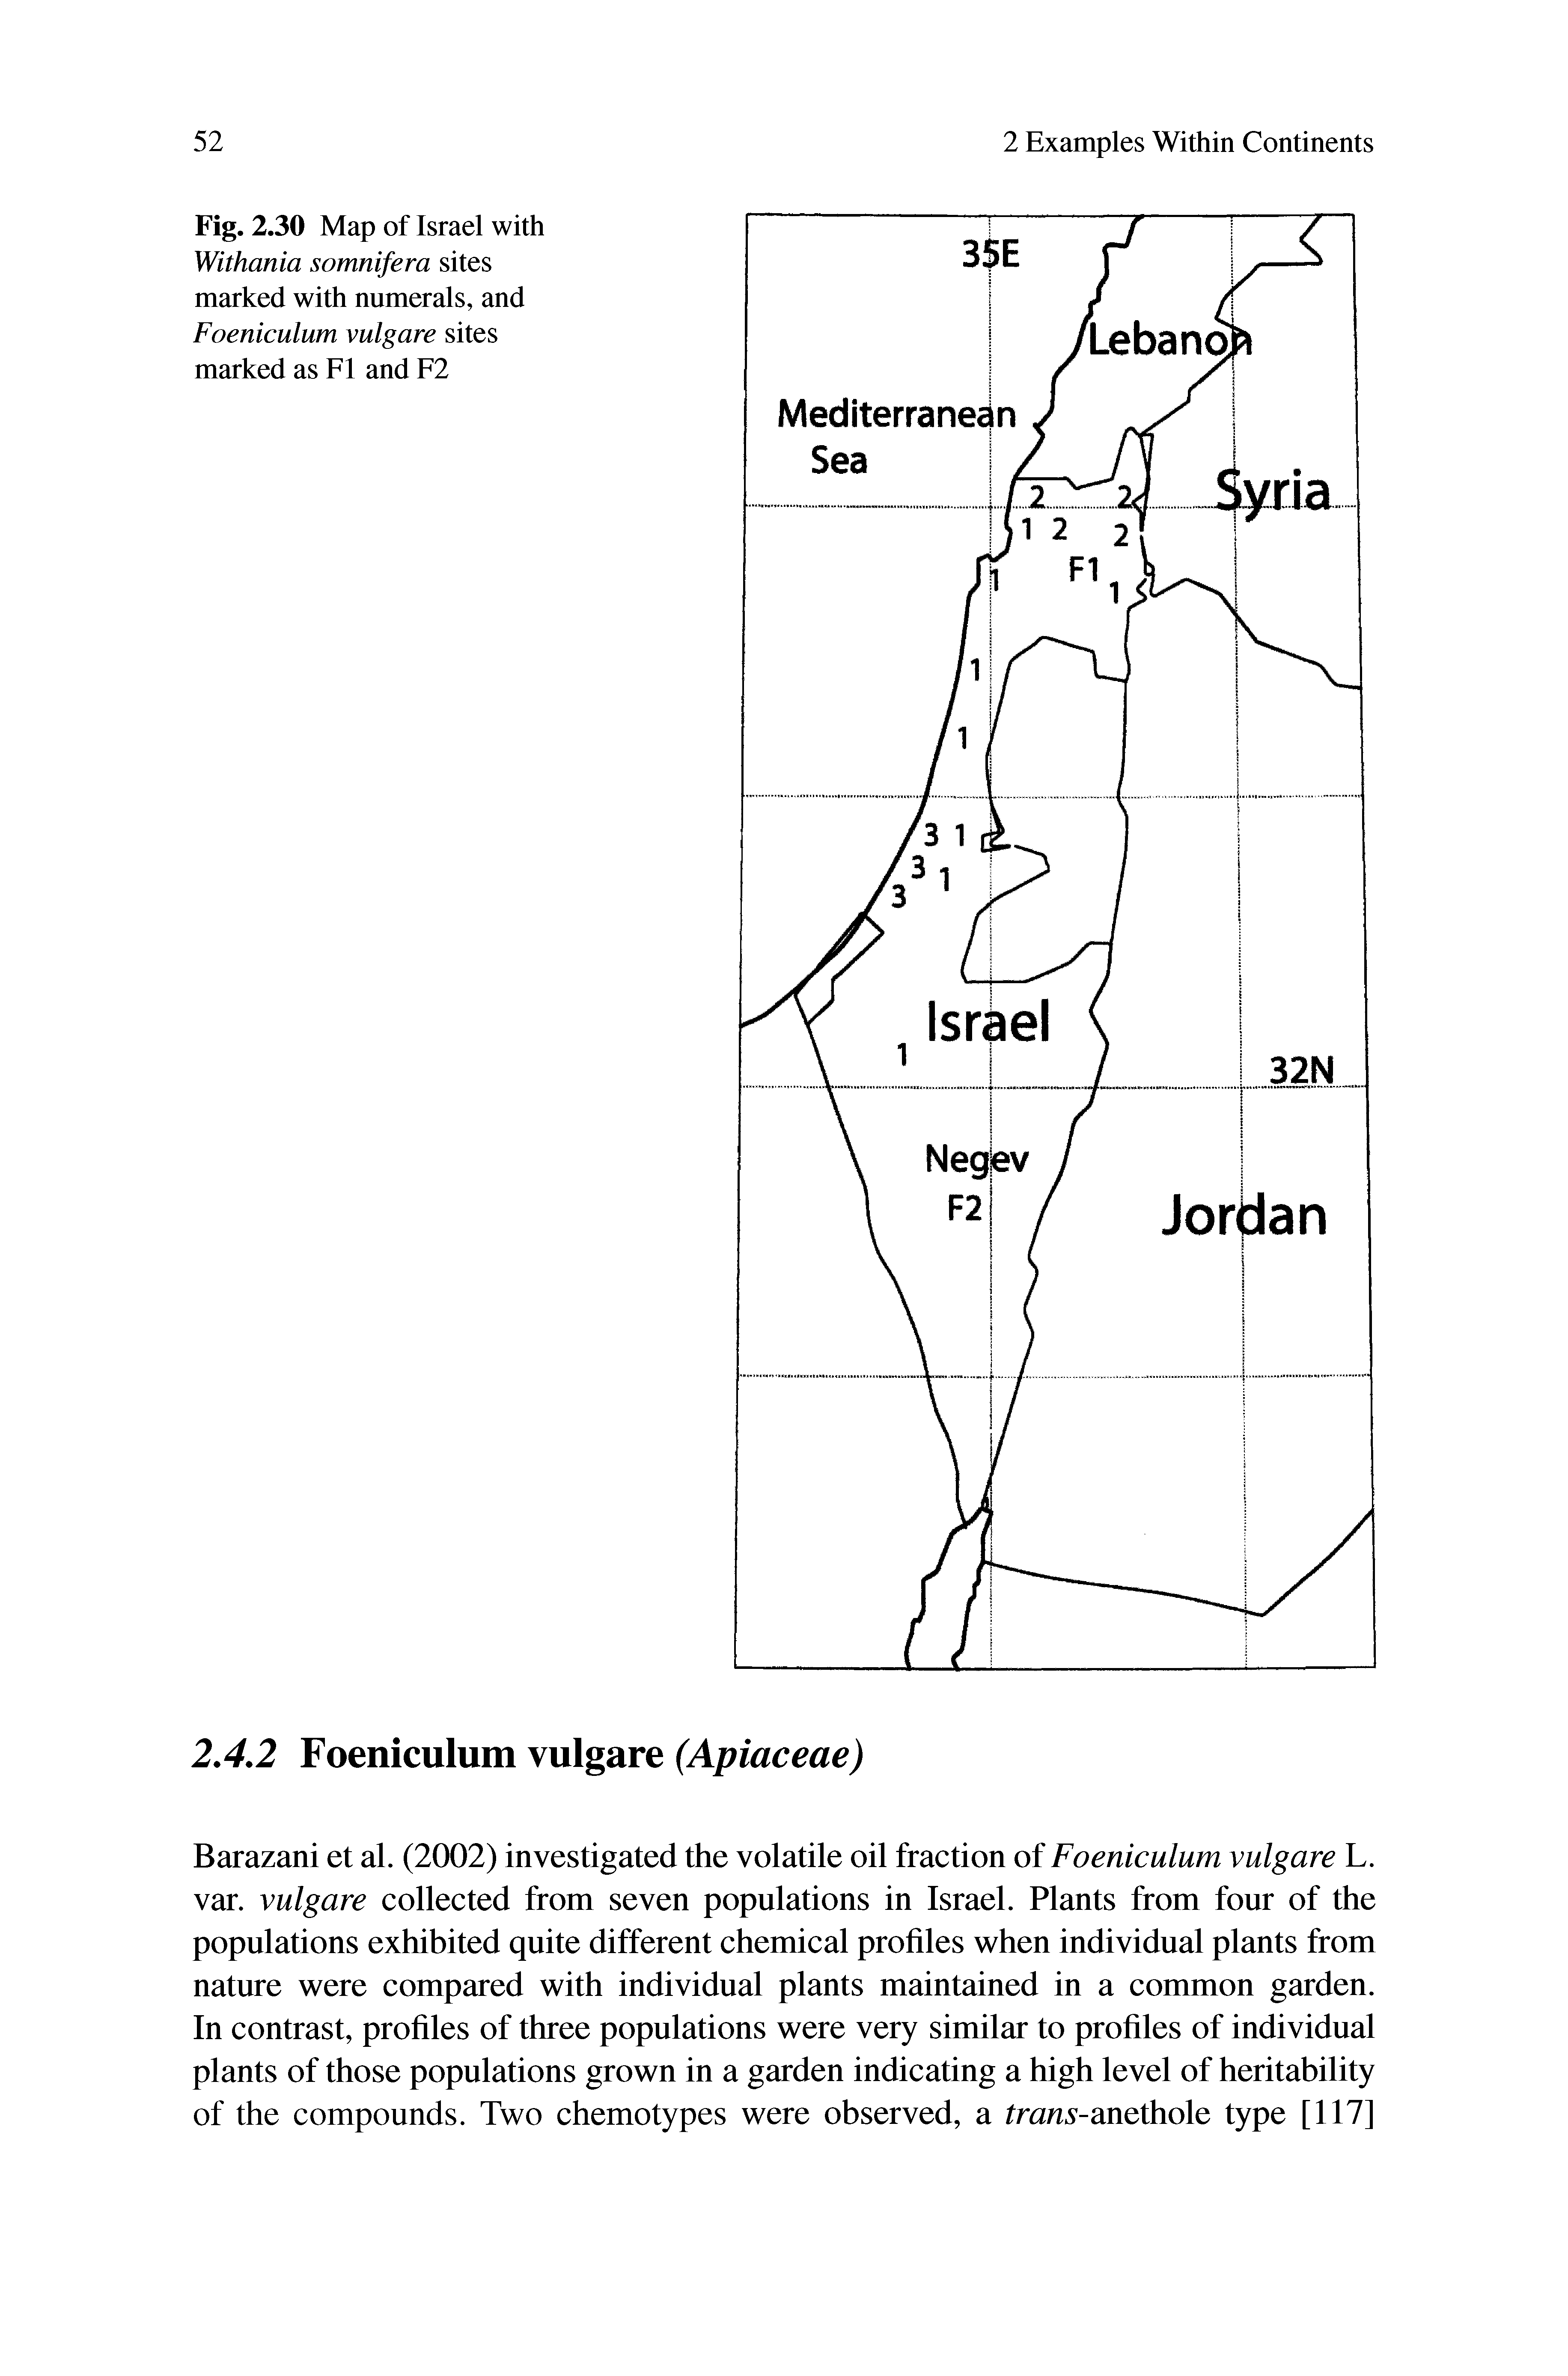 Fig. 2.30 Map of Israel with Withania somnifera sites marked with numerals, and Foeniculum vulgare sites marked as FI and F2...